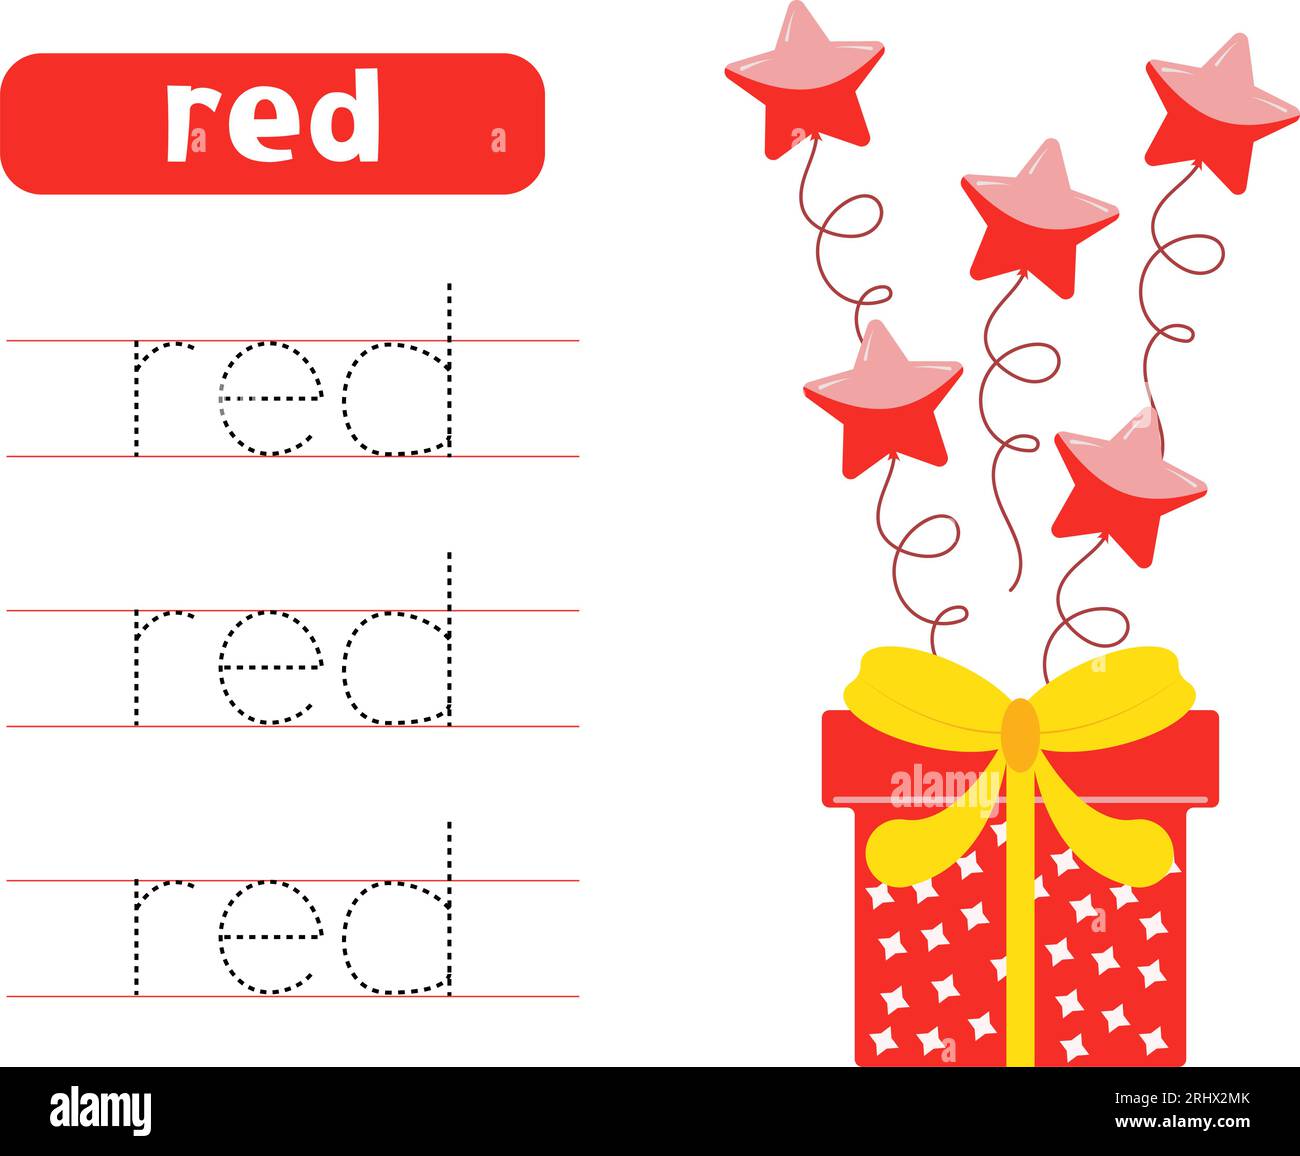 Trace and write word red. Handwriting practice. Learning colors. with gift box and balloons. Worksheets for kids. Stock Vector